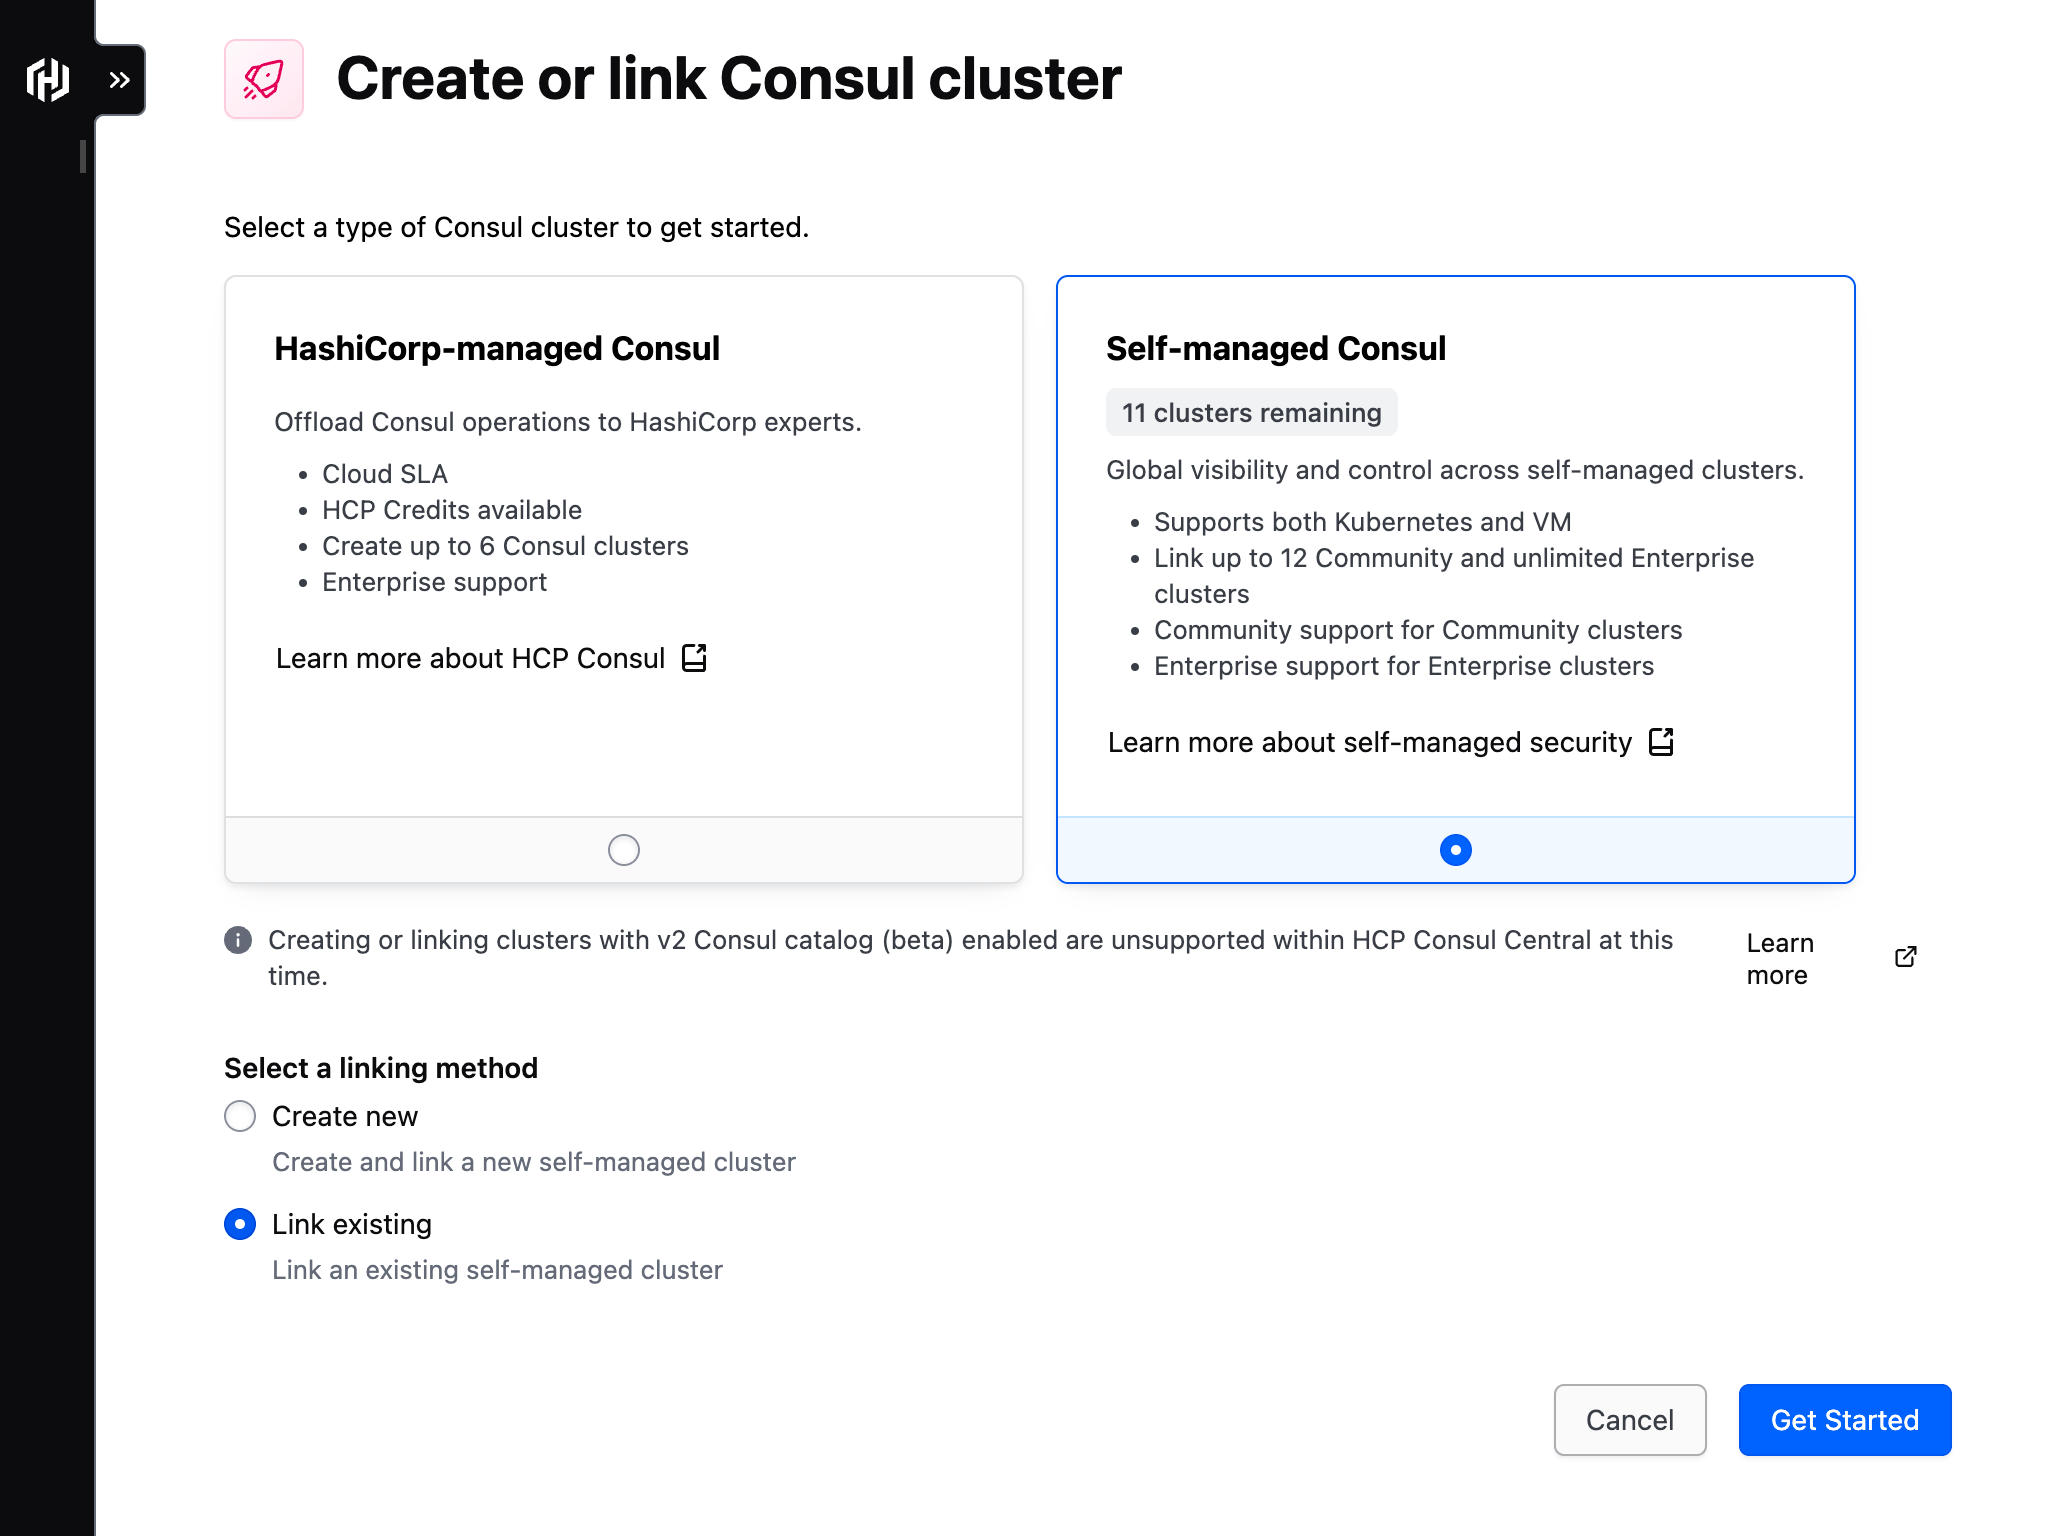 The create or link Consul cluster page. The screen displays various options to link a Consul cluster.